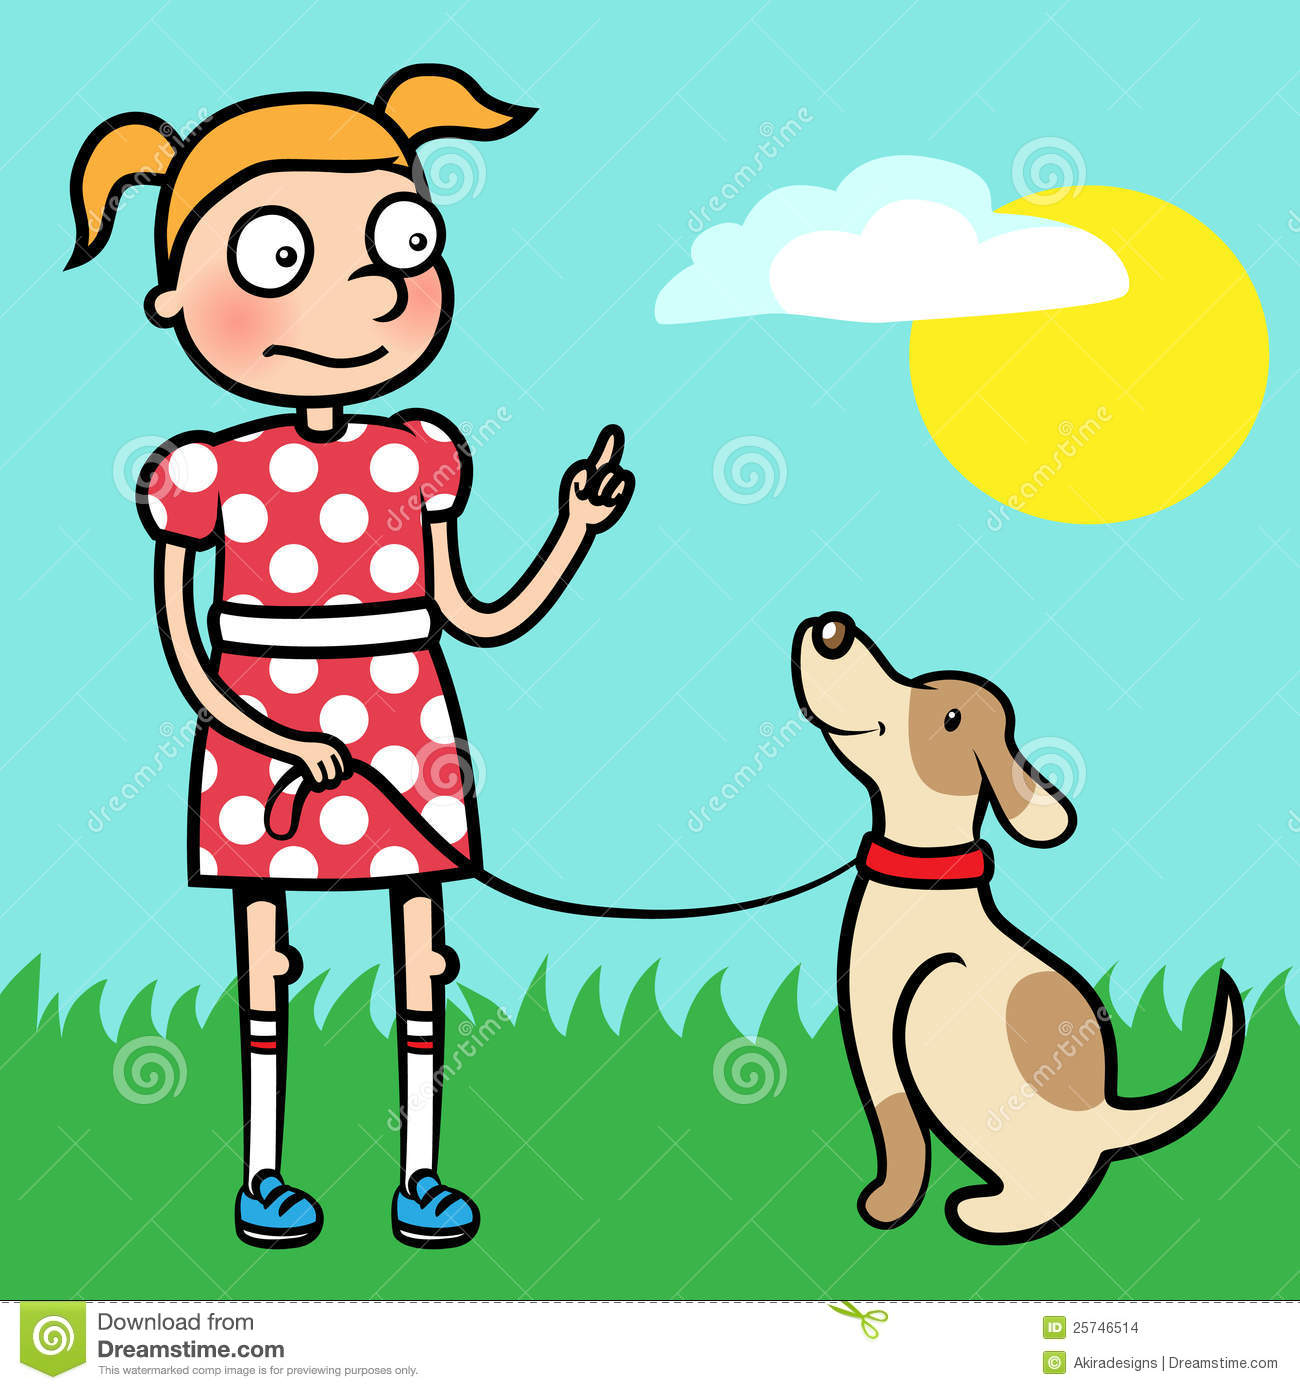 Cartoon Vector Illustration Of A Young Girl Training Obedience With